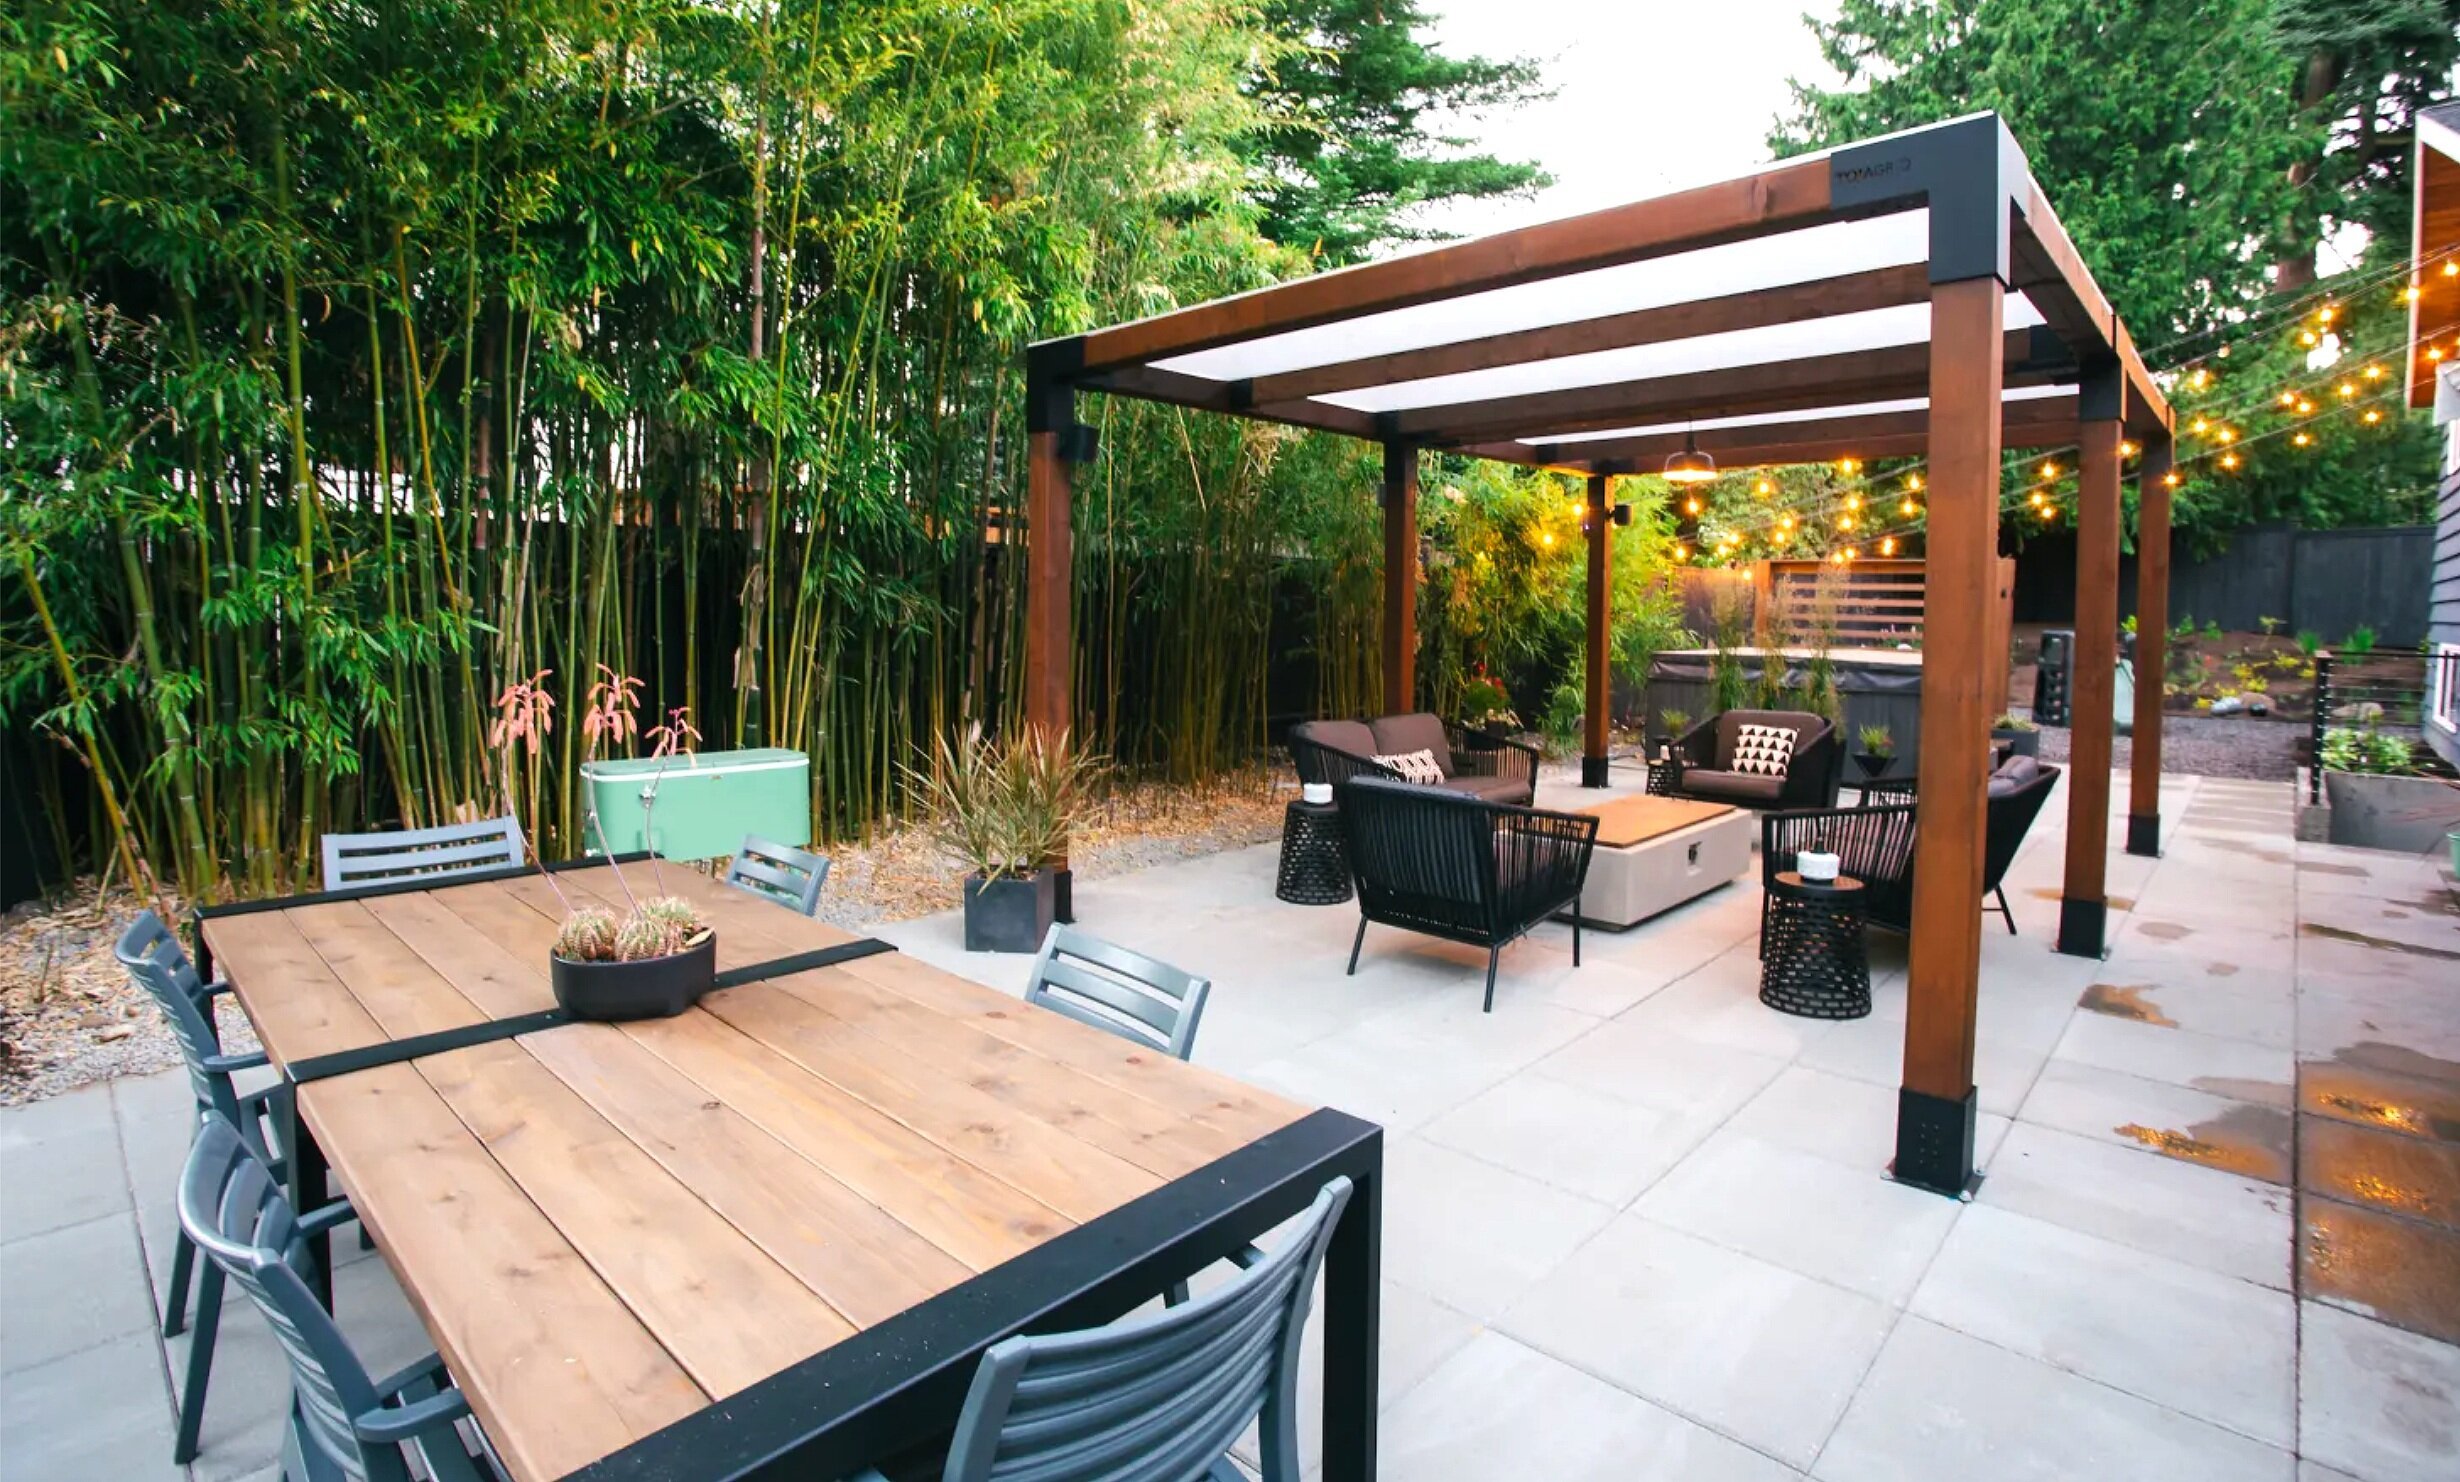 a paved backyard with fence and bamboo for privacy and pergola with clear roof shading a fire peat seating area